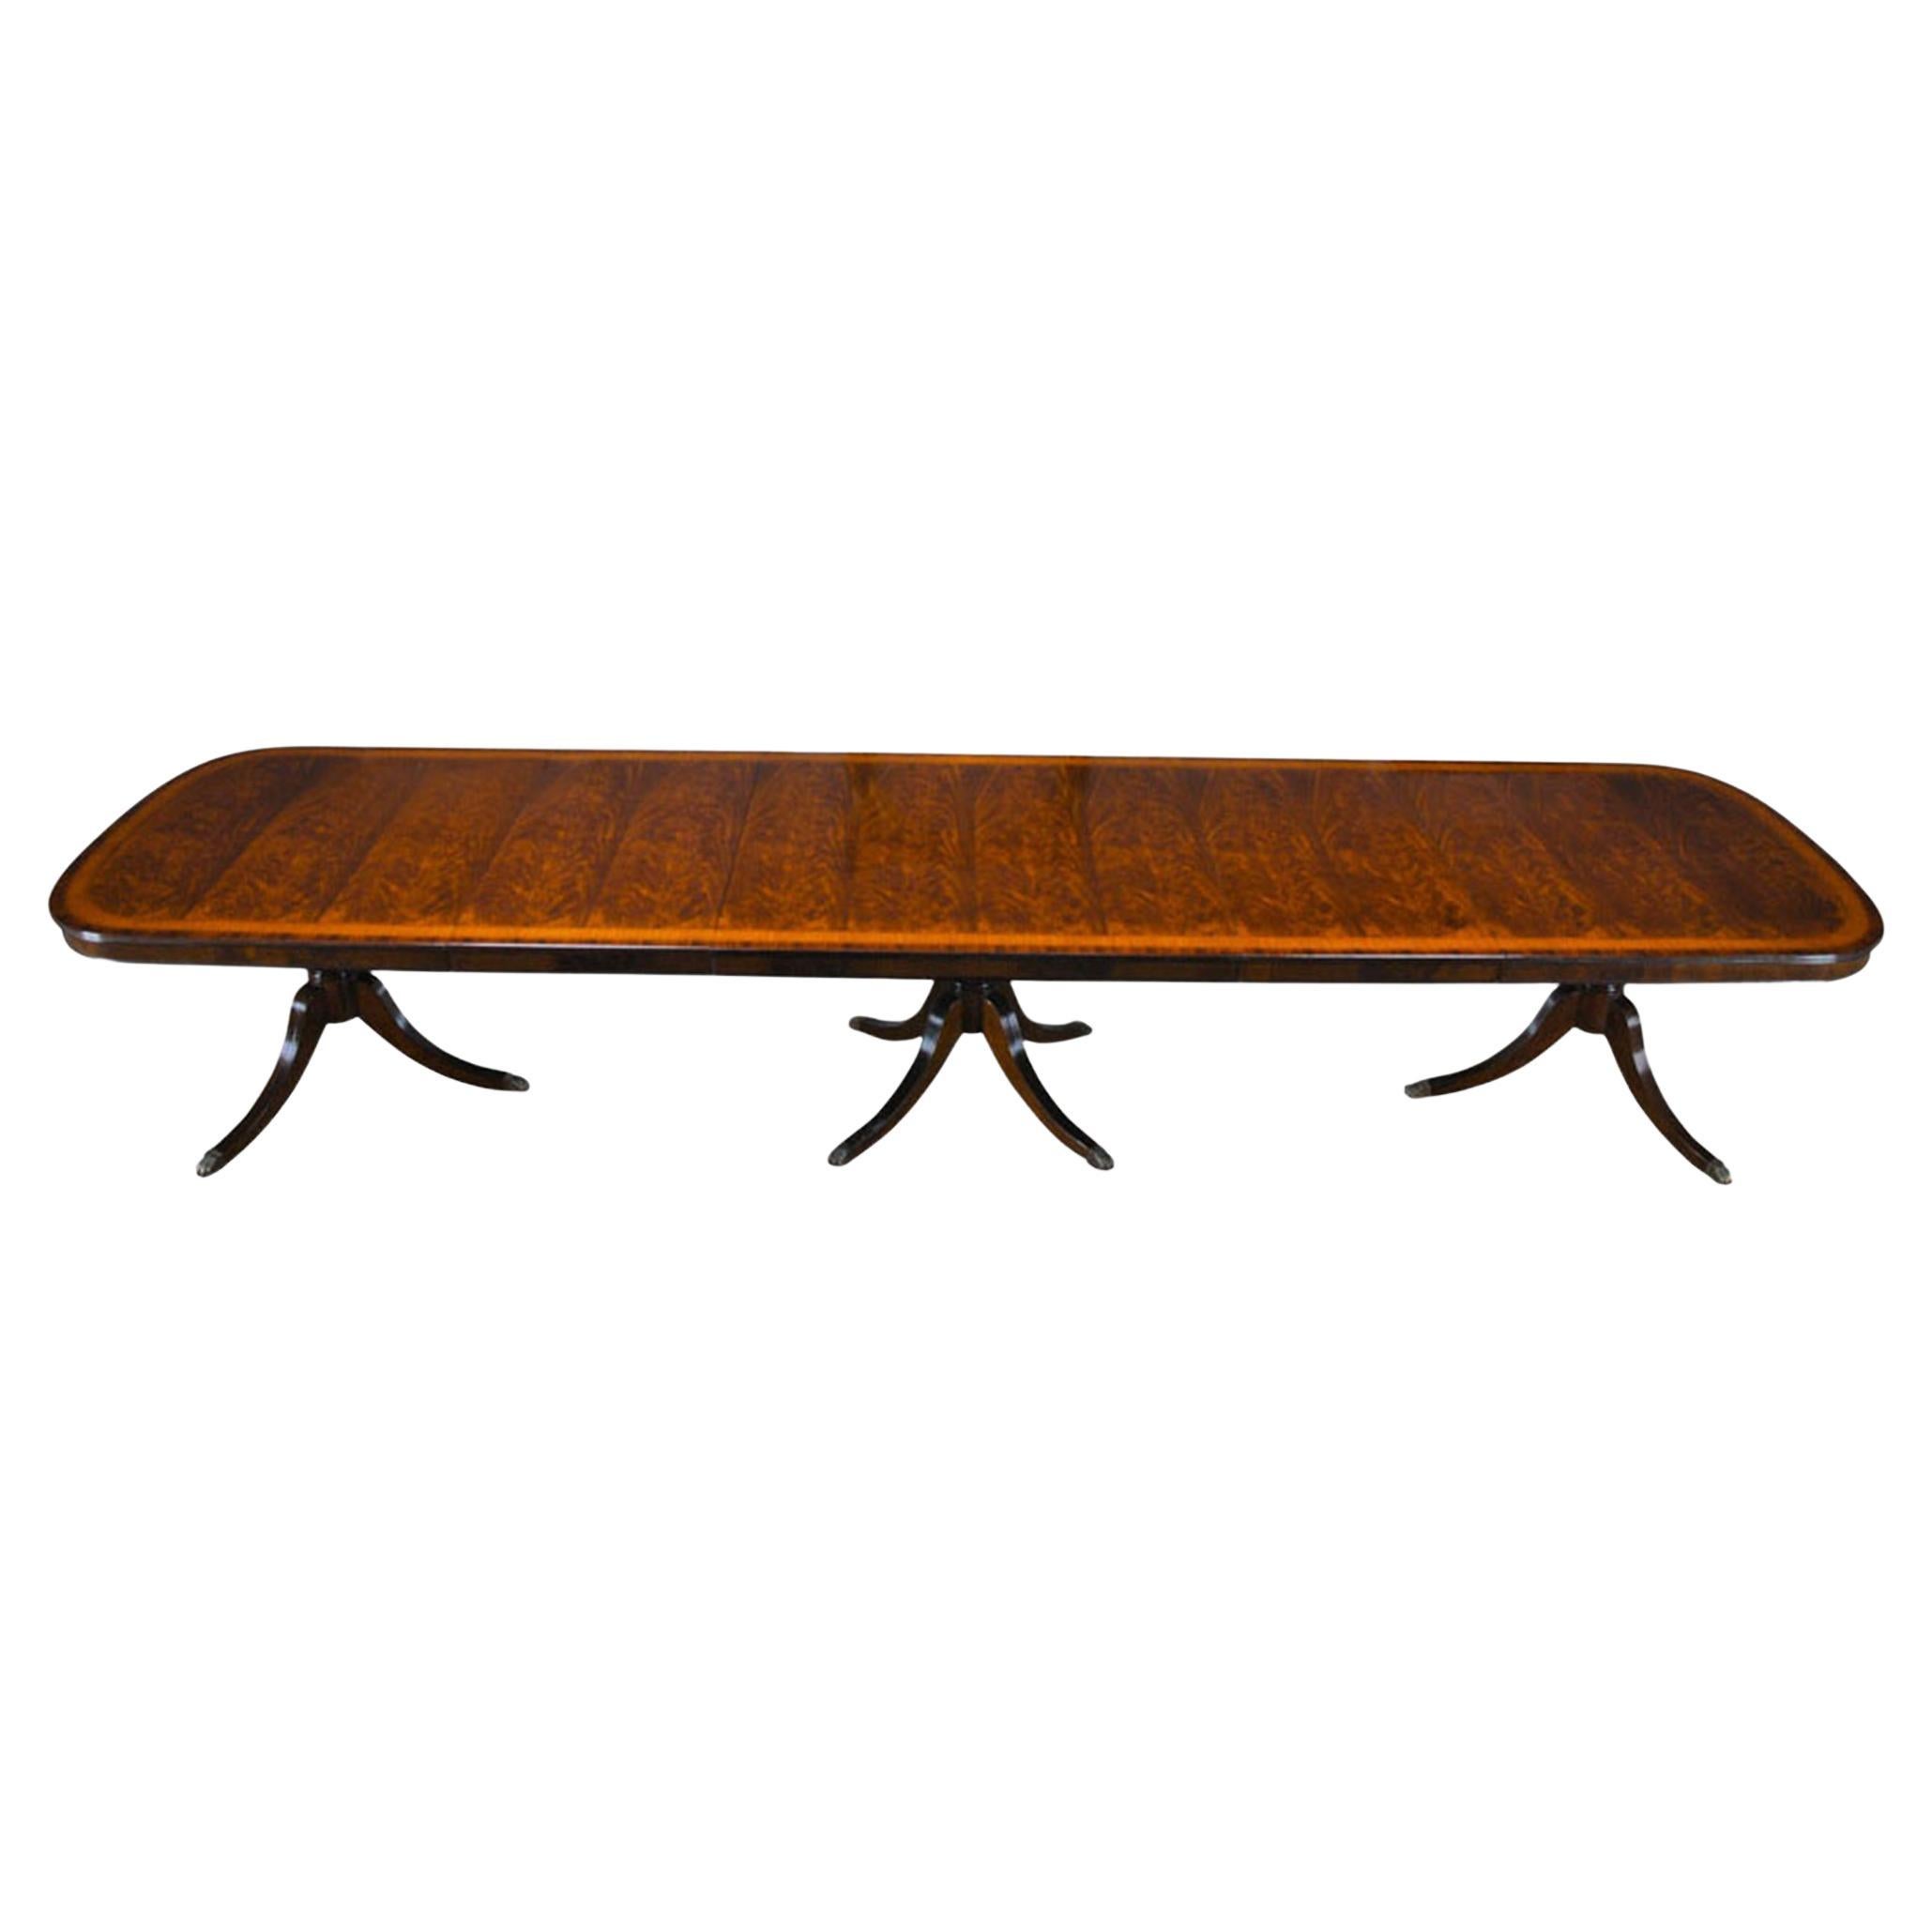 15 Foot Mahogany Dining Table For Sale